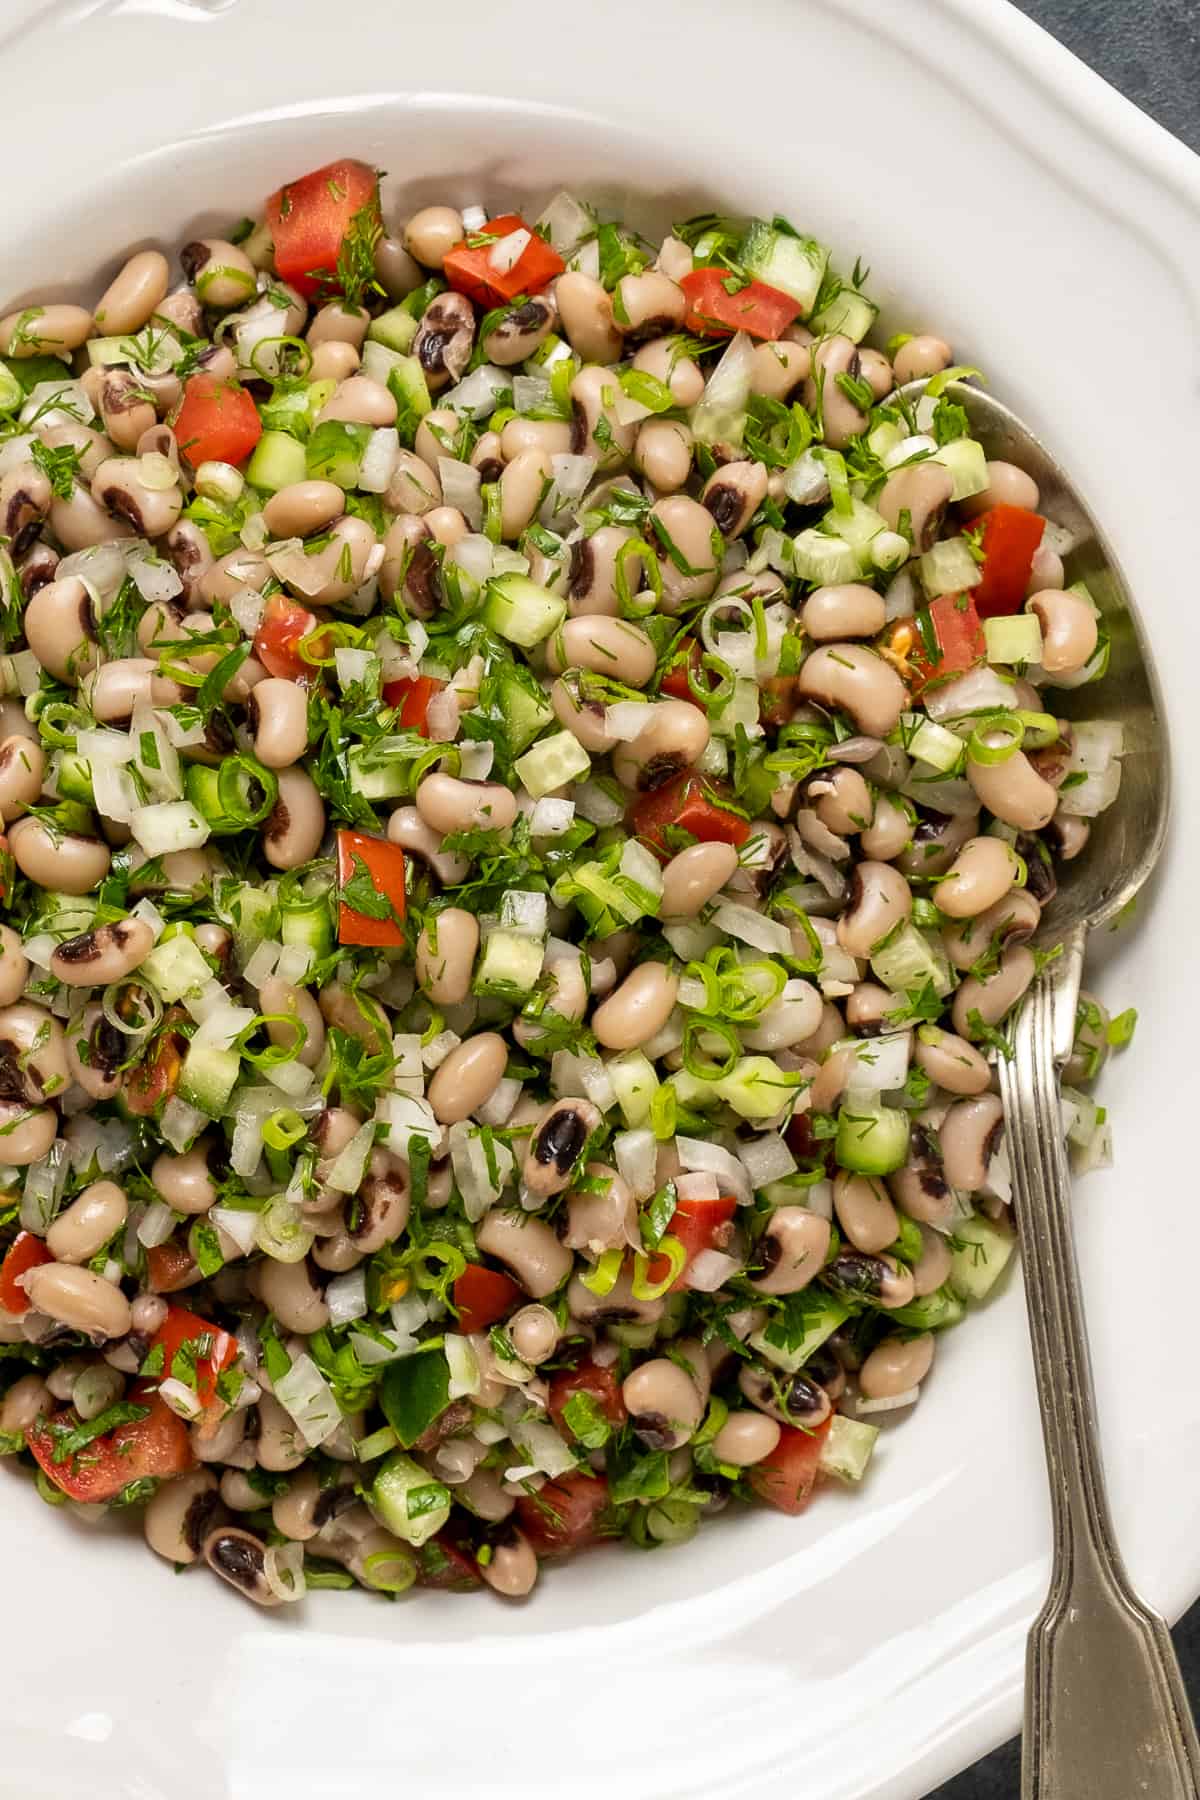 Black-eyed bean salad in a white bowl from top view.